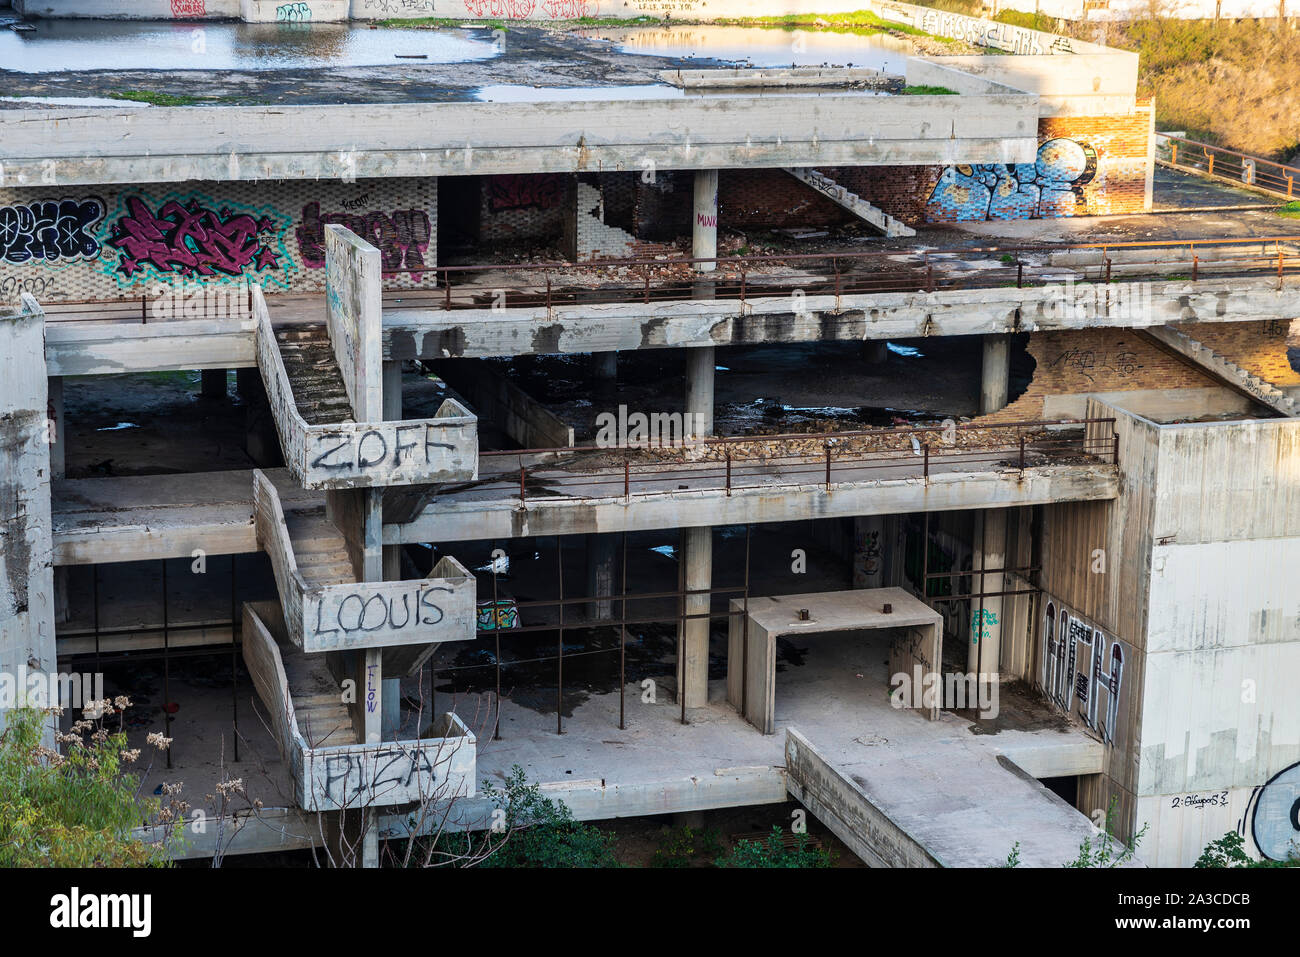 Athens, Greece - January 1, 2019: Abandoned building under construction with graffiti in Athens, Greece Stock Photo